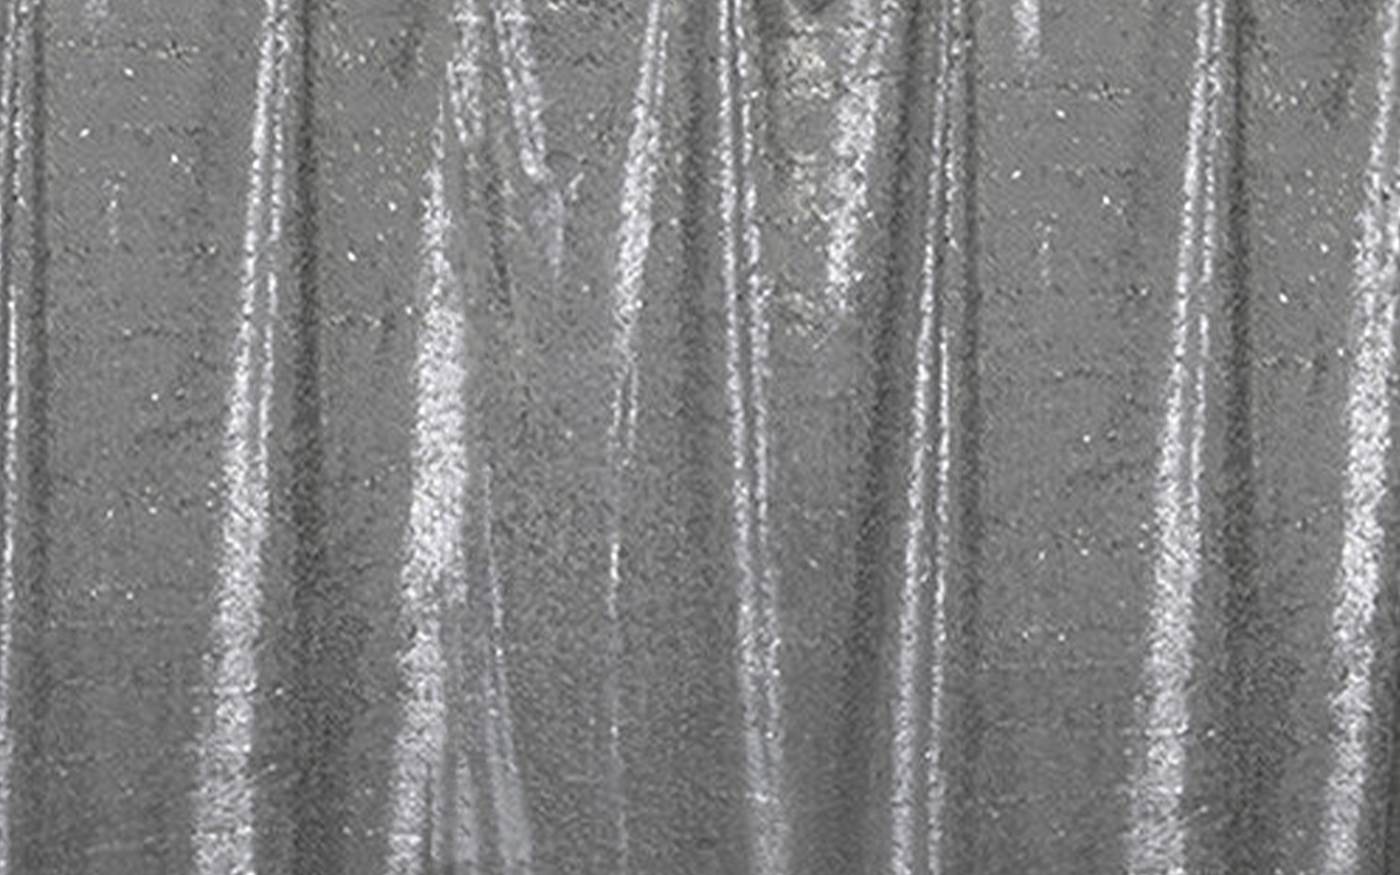 Charcoal silver sequin shining photo booth backdrop